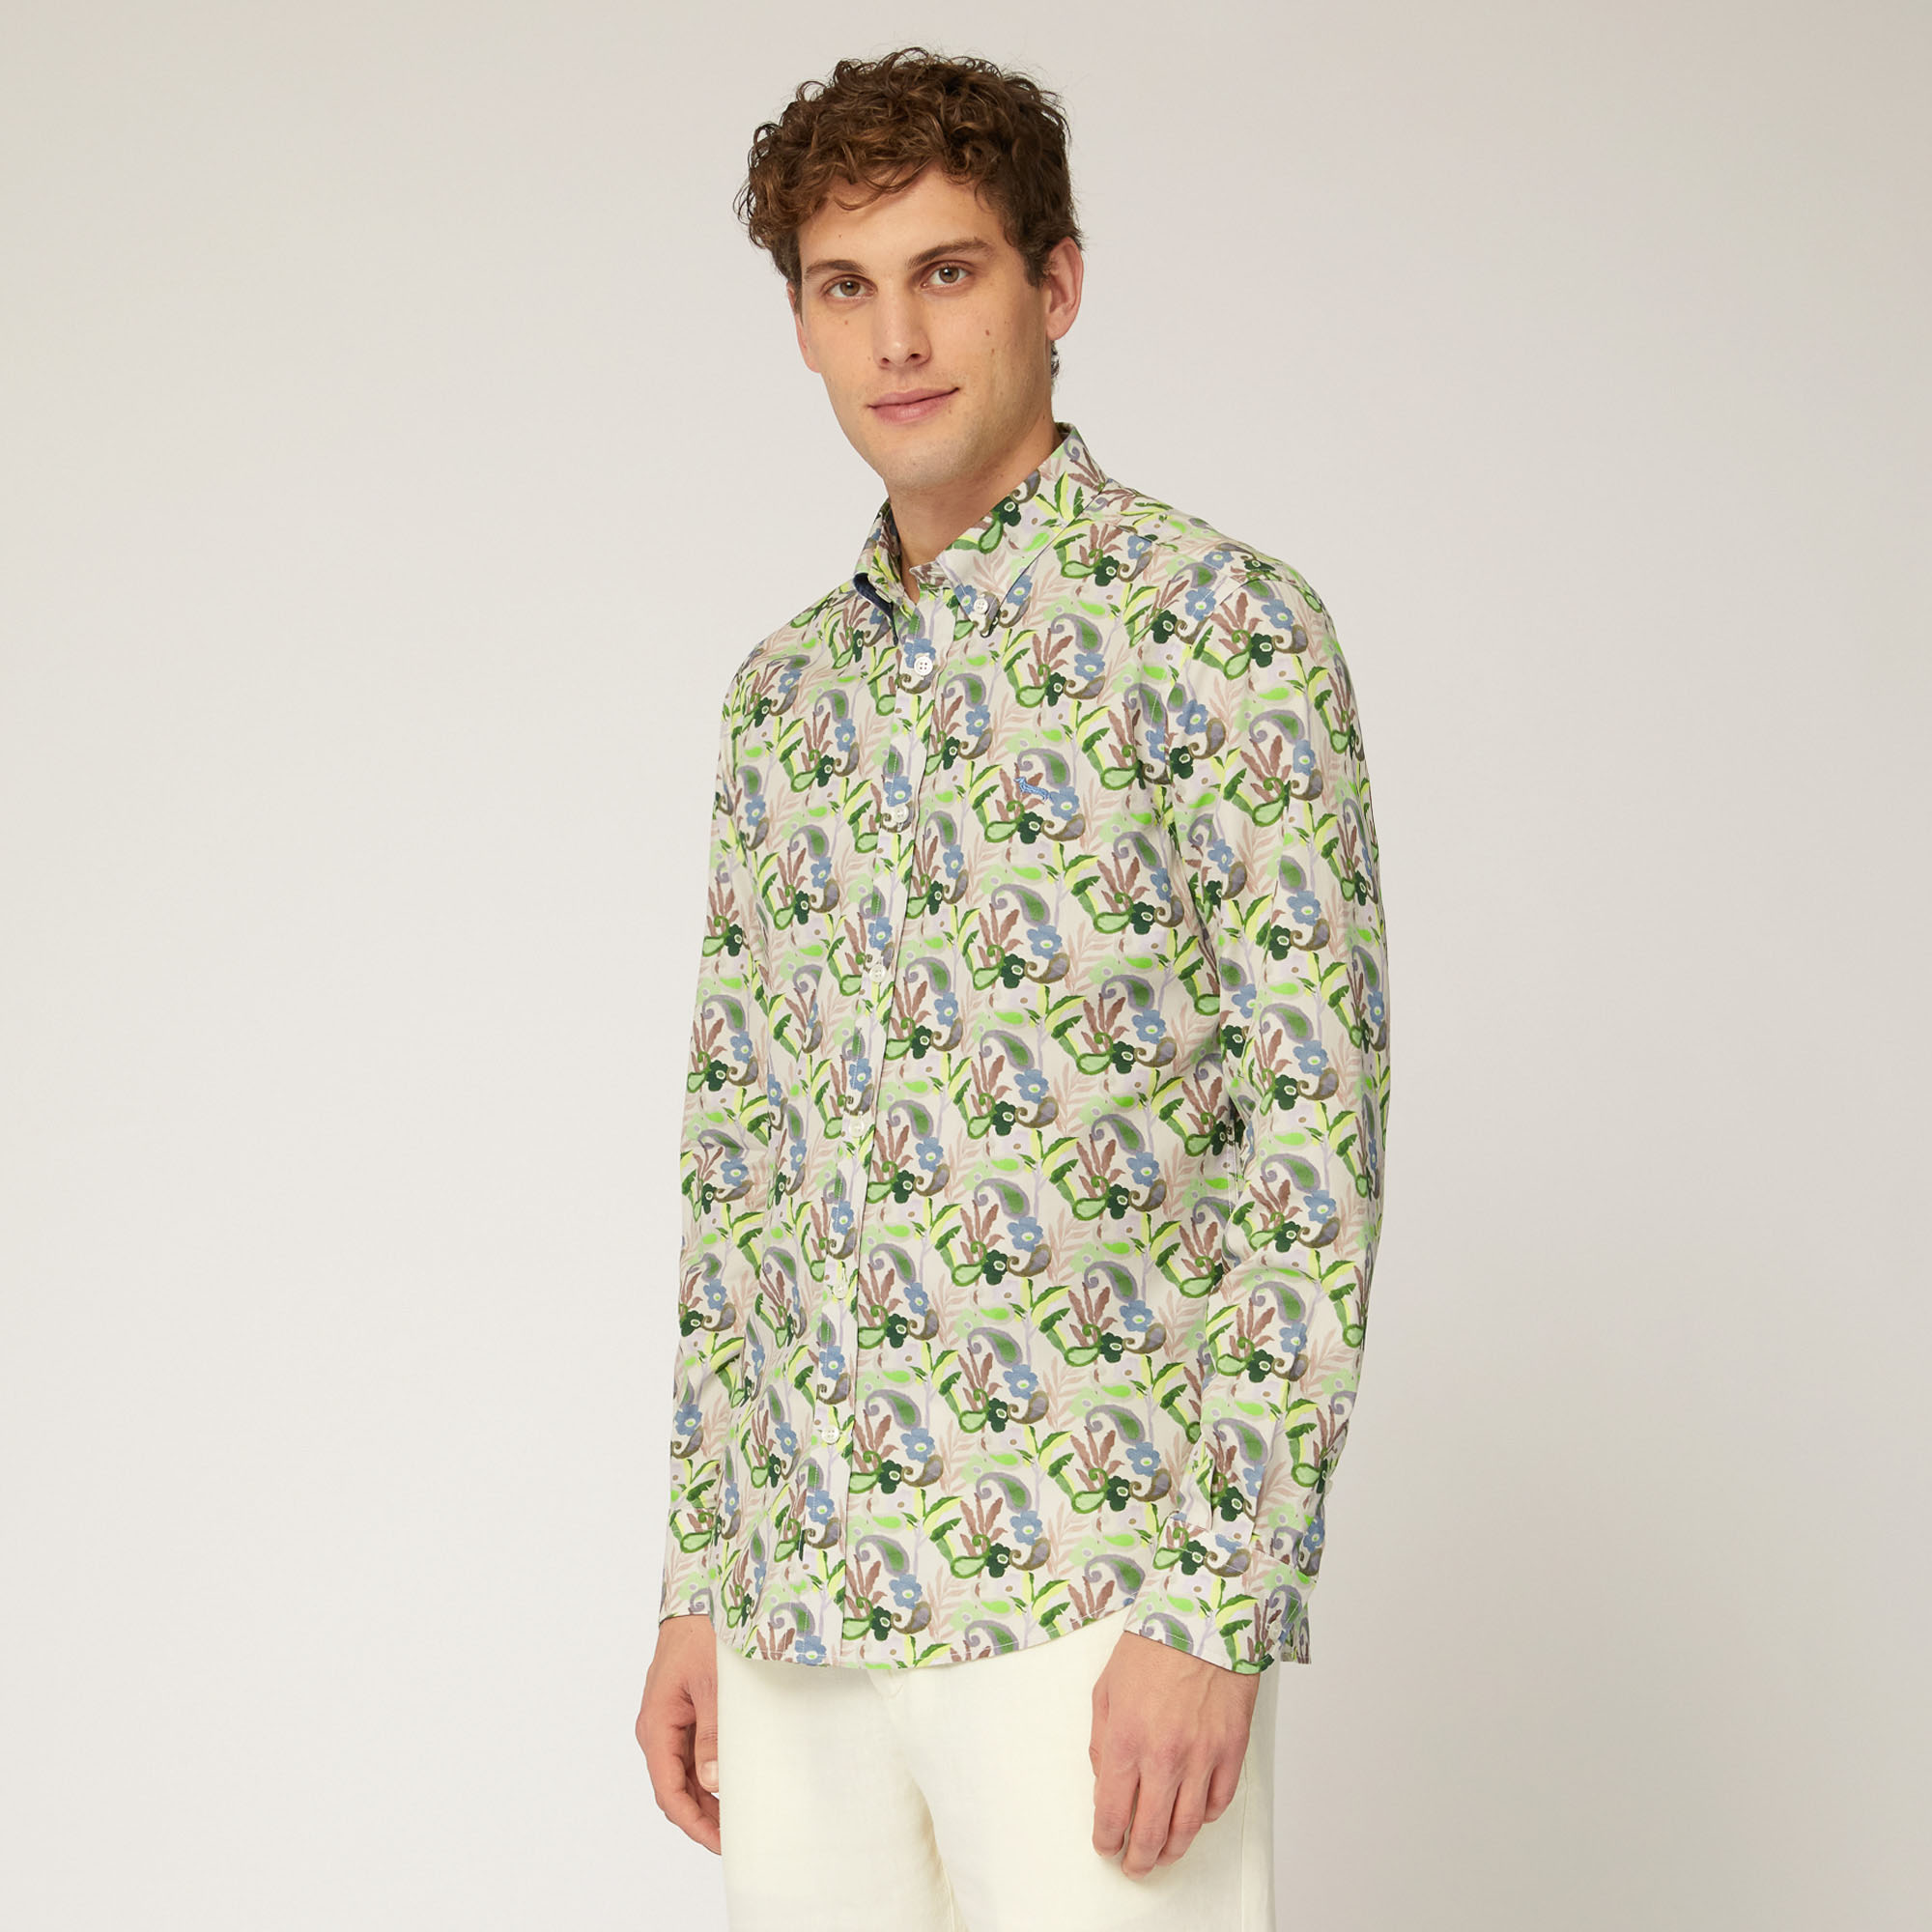 Cotton Poplin Shirt with Floral Print